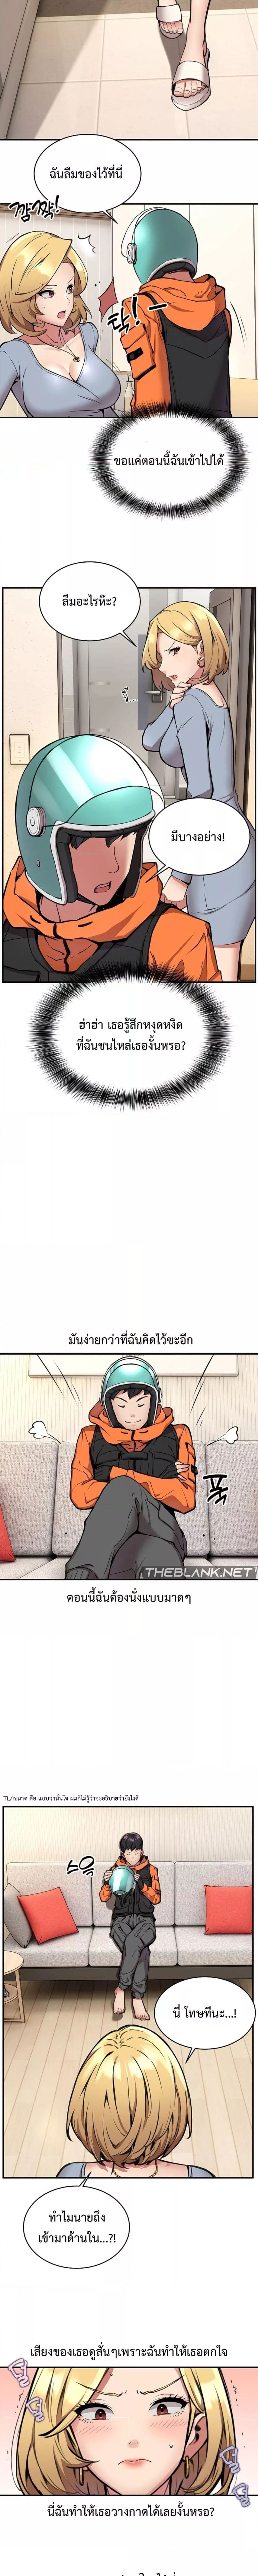 Driver in the New City ตอนที่ 2 ภาพ 4